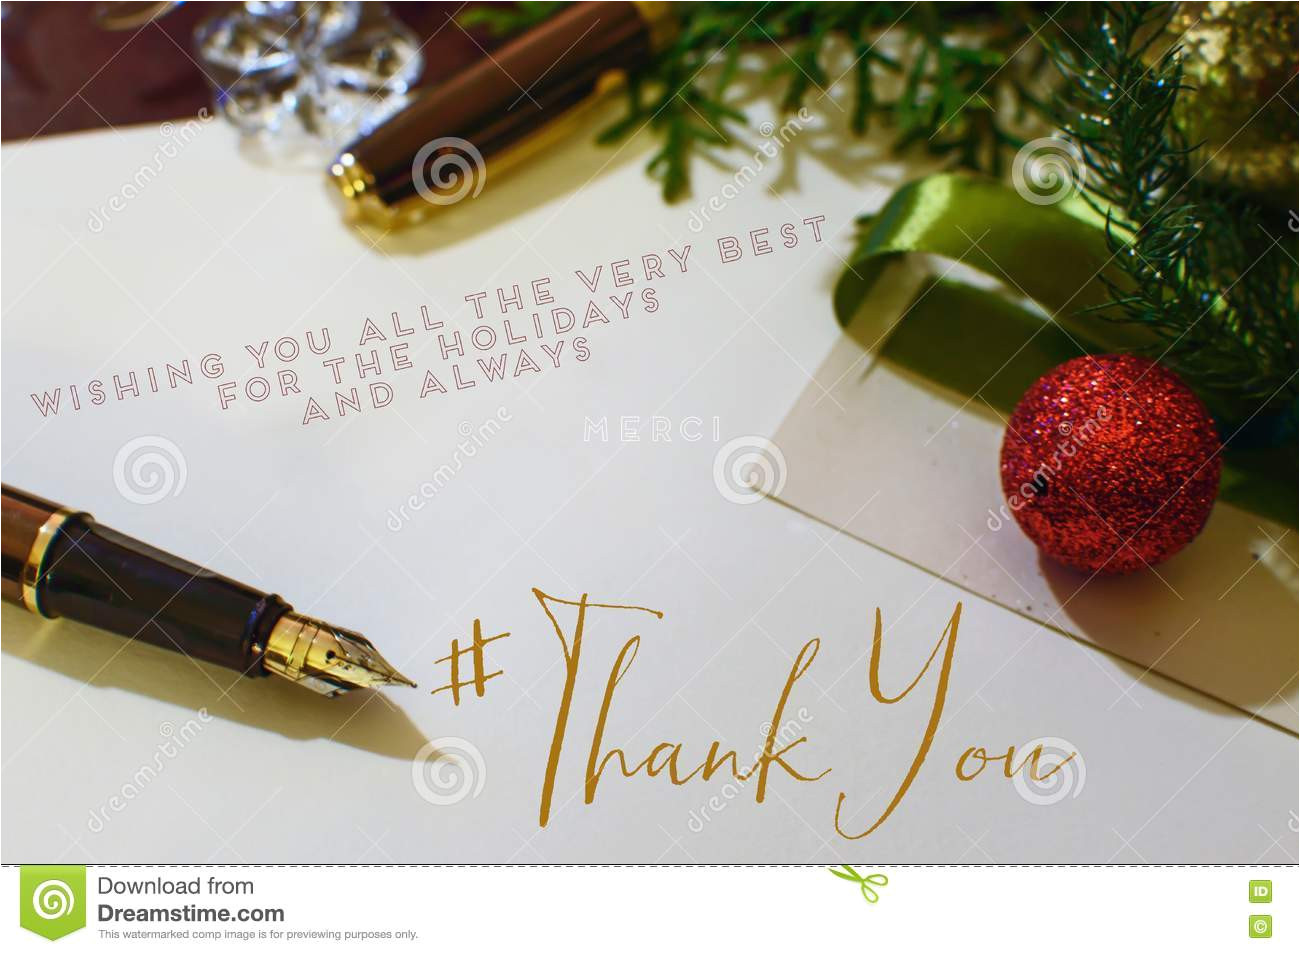 christmas thank you card gold fountain pen desk ornaments evergreen tree gold crystal writing notes end 82670901 jpg